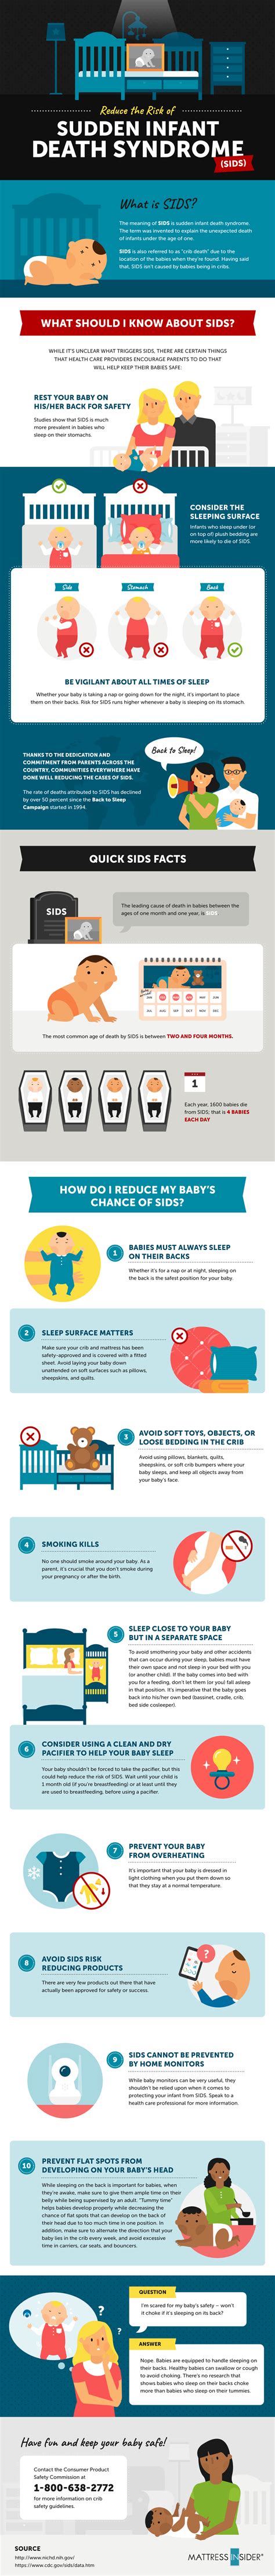 SIDS : How to Reduce the Risk [Infographic] | Insider Living